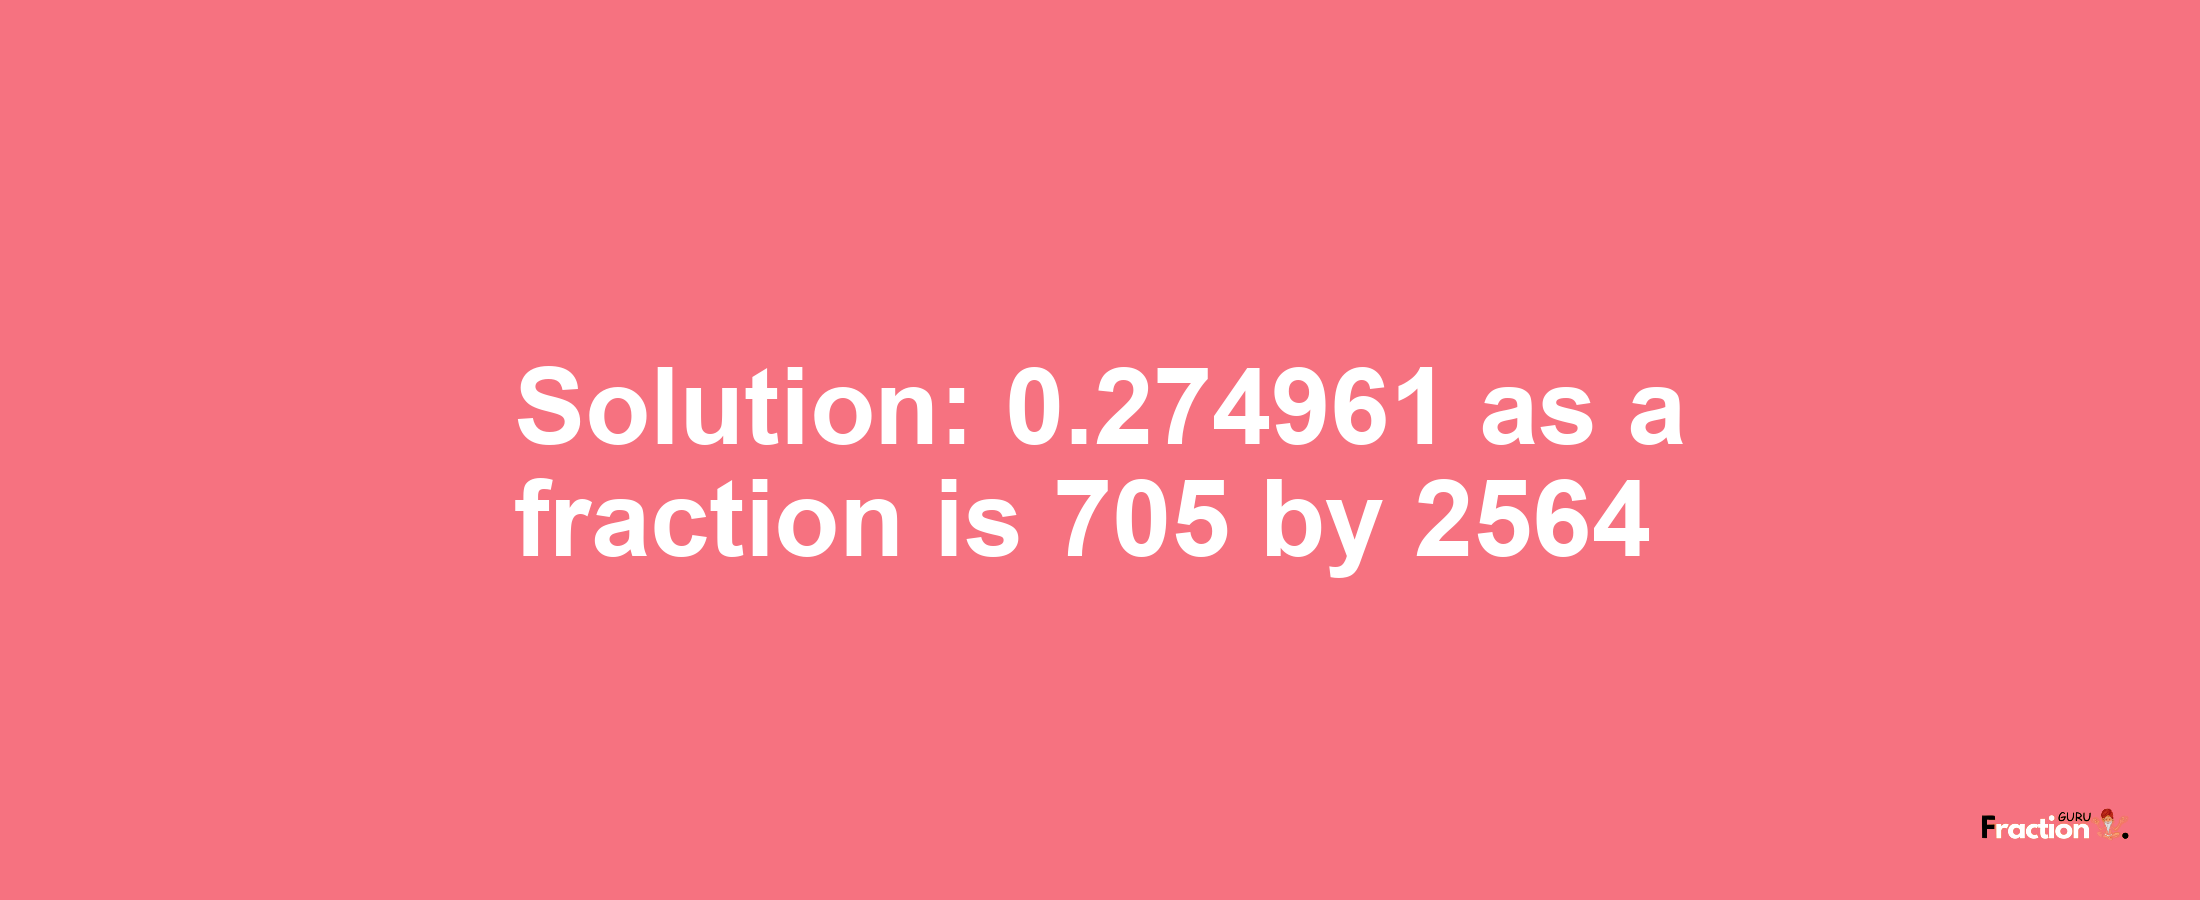 Solution:0.274961 as a fraction is 705/2564